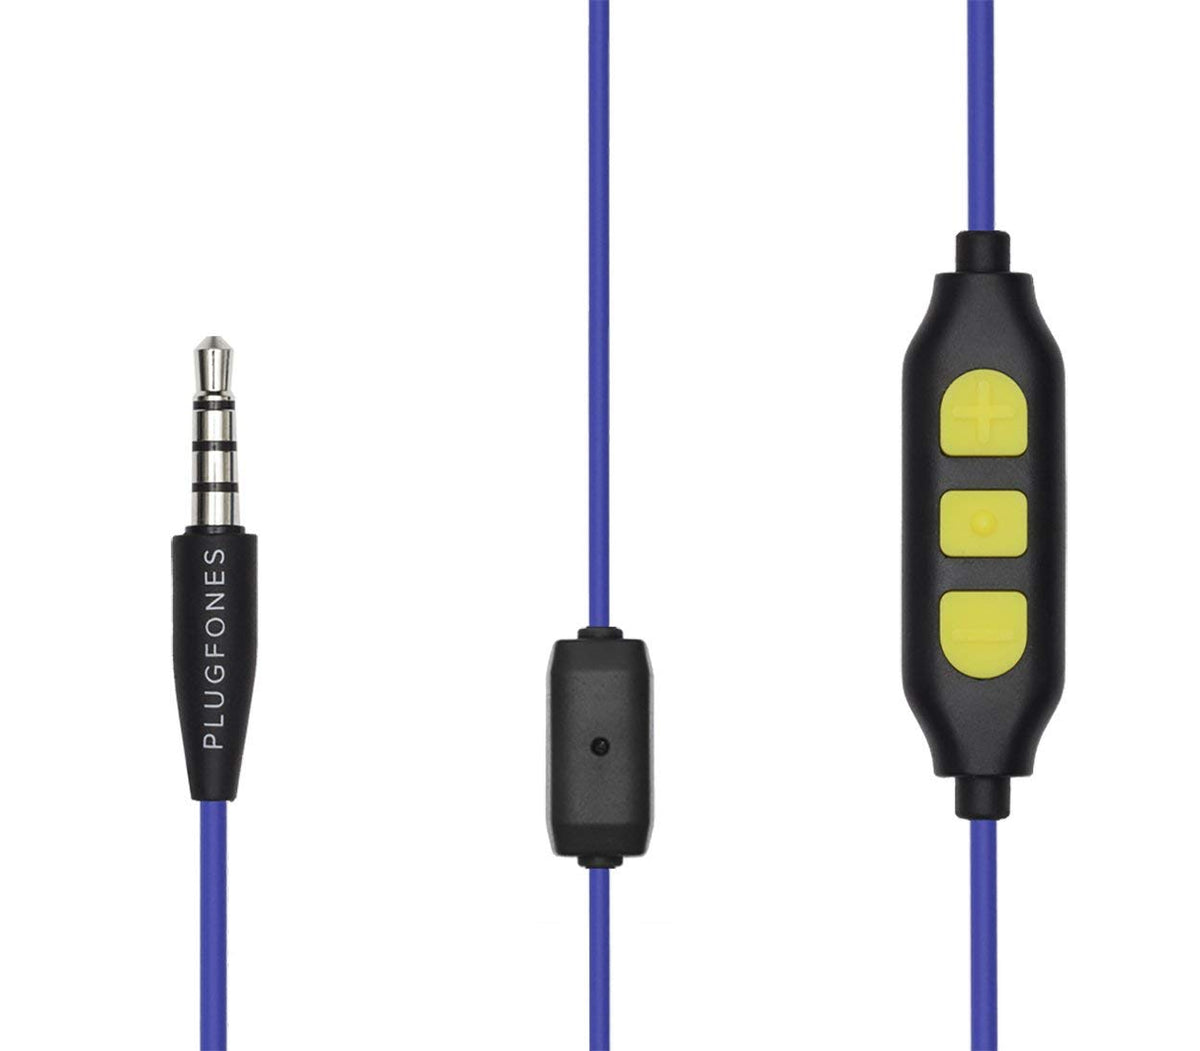 Plugfones PGP-UY Guardian Plus Wired Earphone, Blue/Yellow